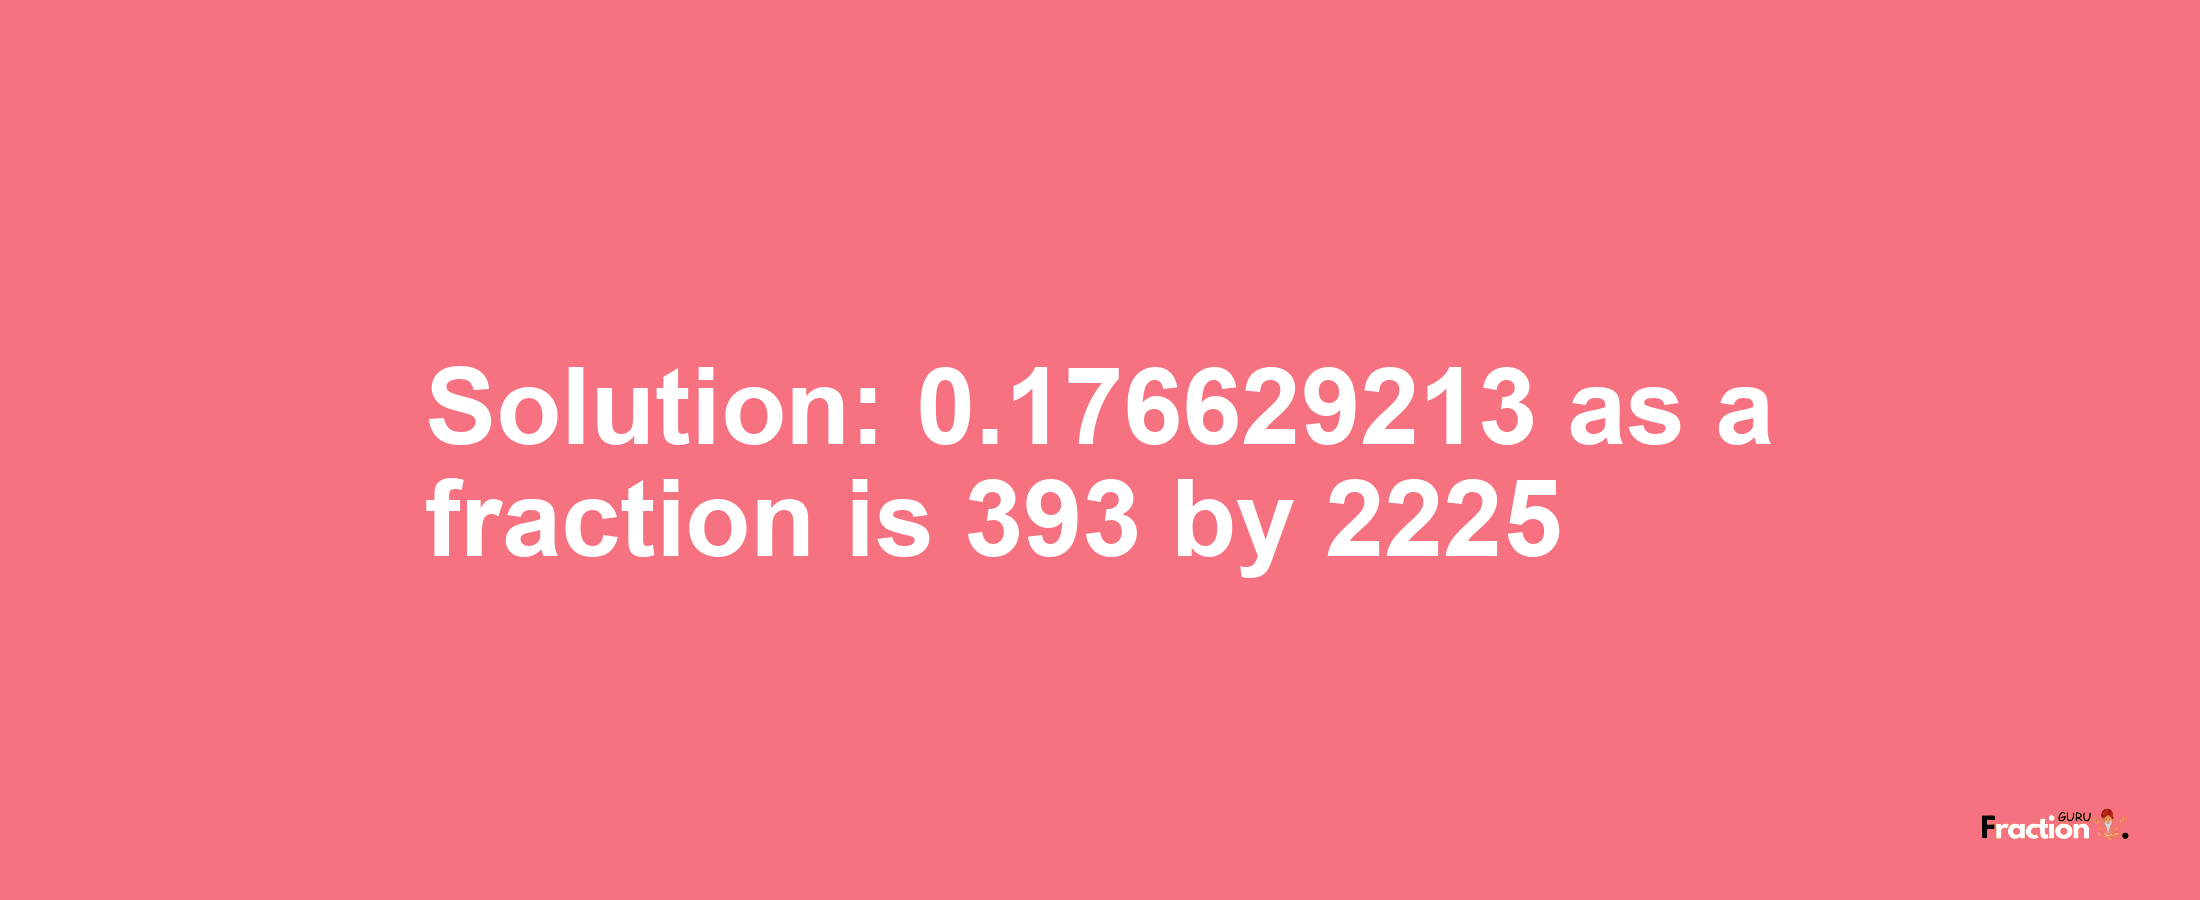 Solution:0.176629213 as a fraction is 393/2225